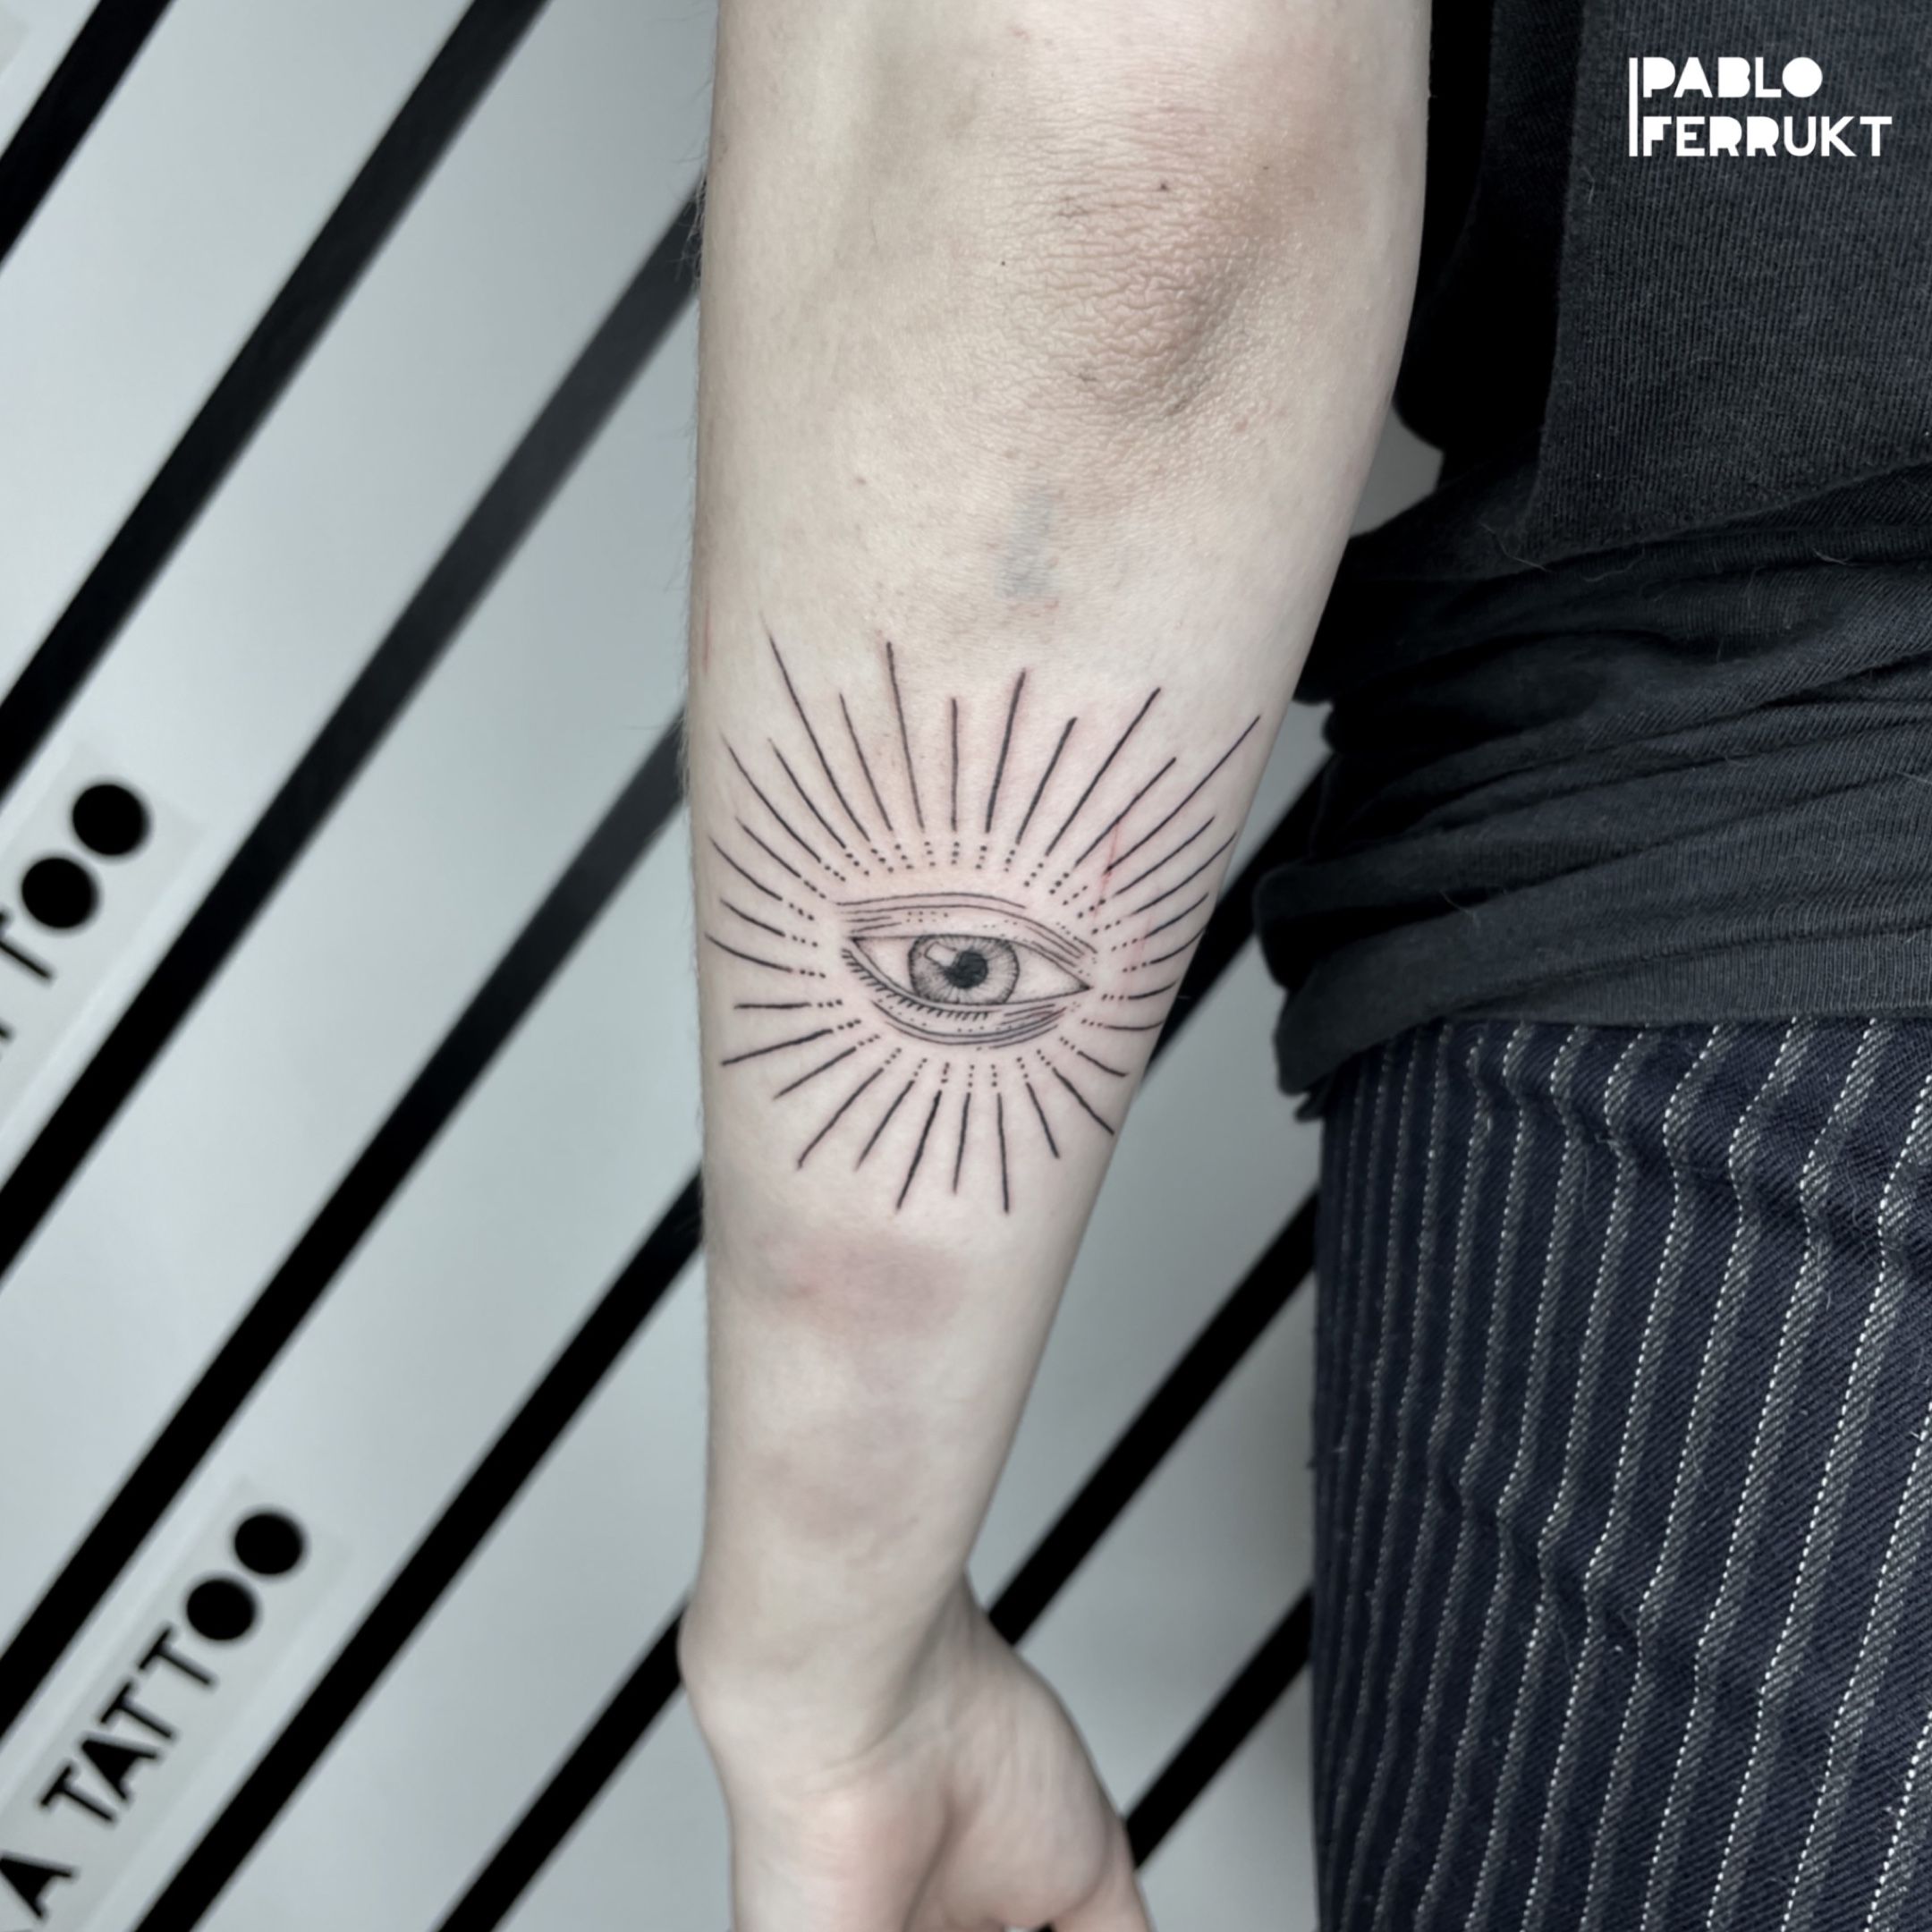 Tattoo uploaded by Pablo Ferrukt Tattoos Berlin • Eye for @lena_romanowsky  , thanks again!!! Done @amikatattoo with machines from @lokomachines For  appointments write me a DM or check the link in my